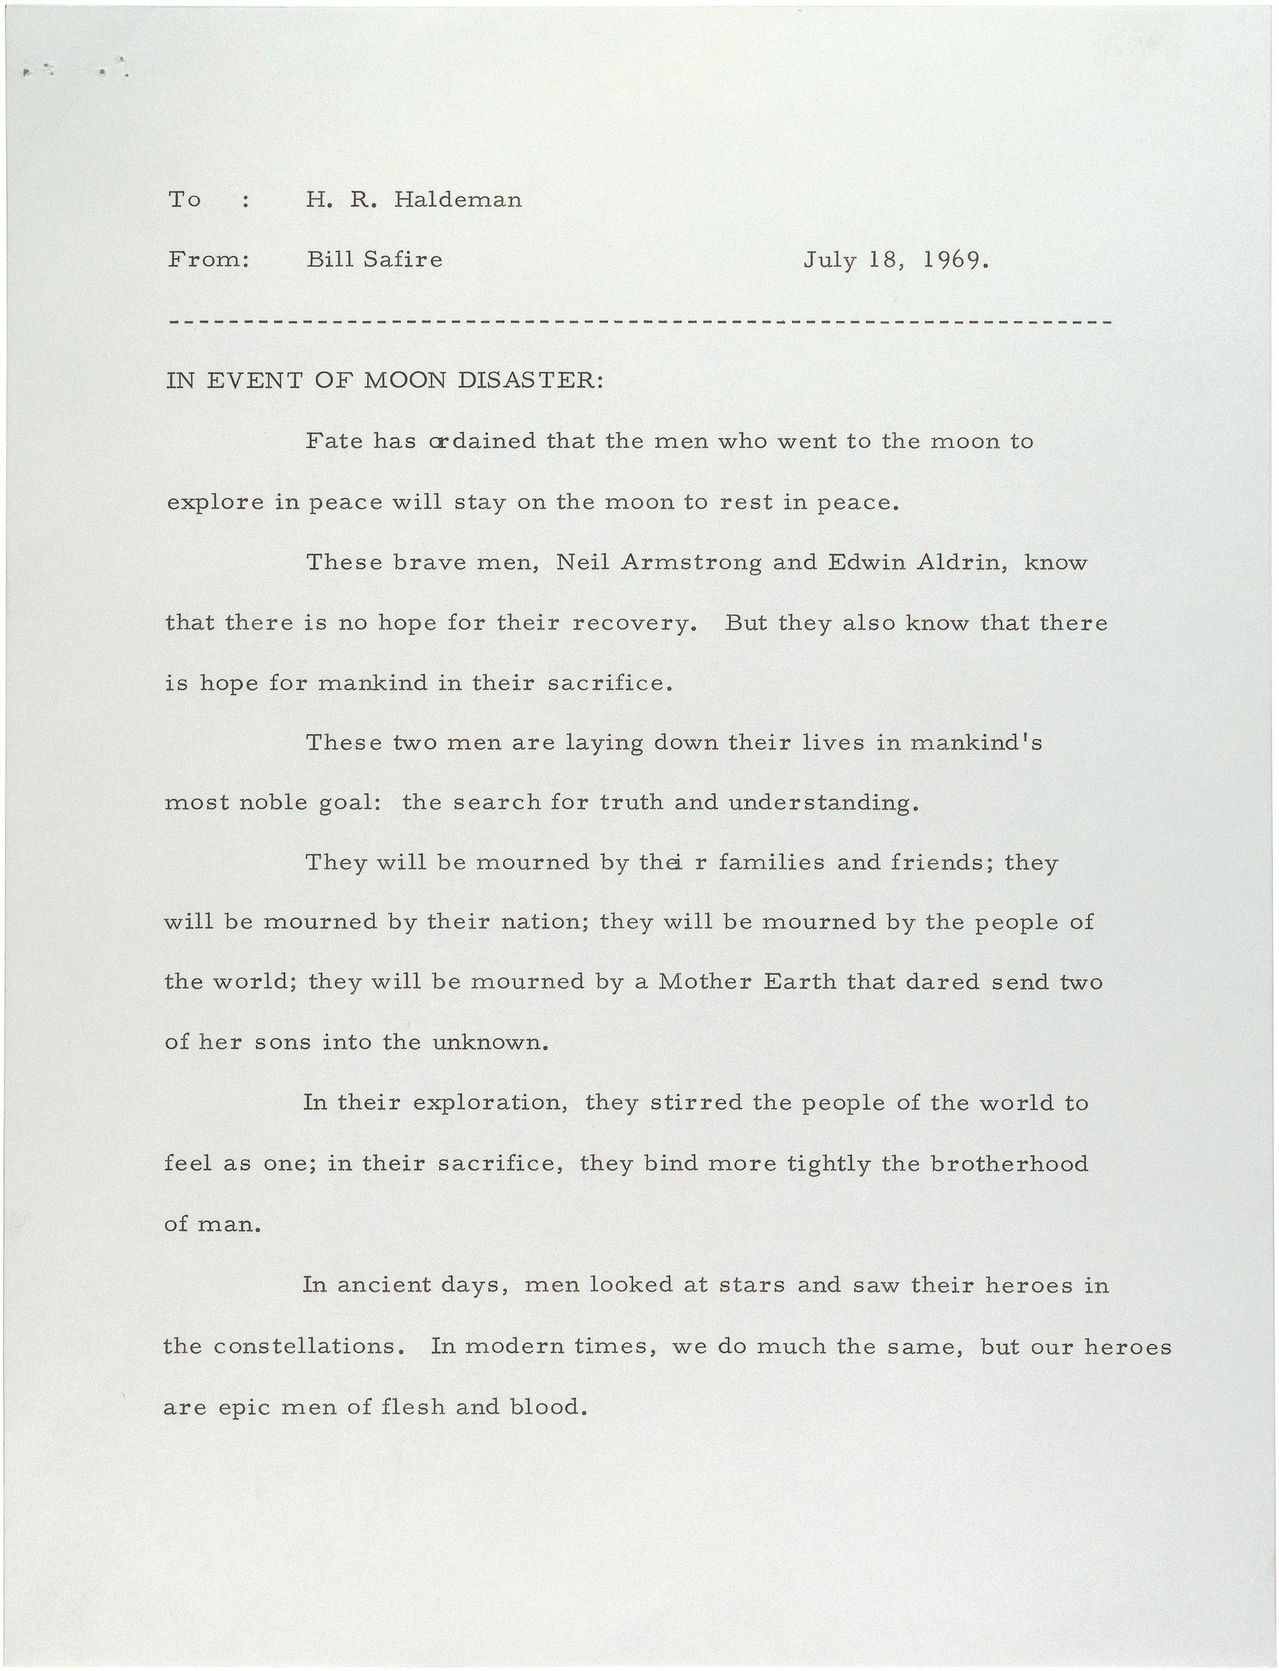 The official statement by President Nixon to be read in case the astronauts were stranded on the Moon – July 18, 1969